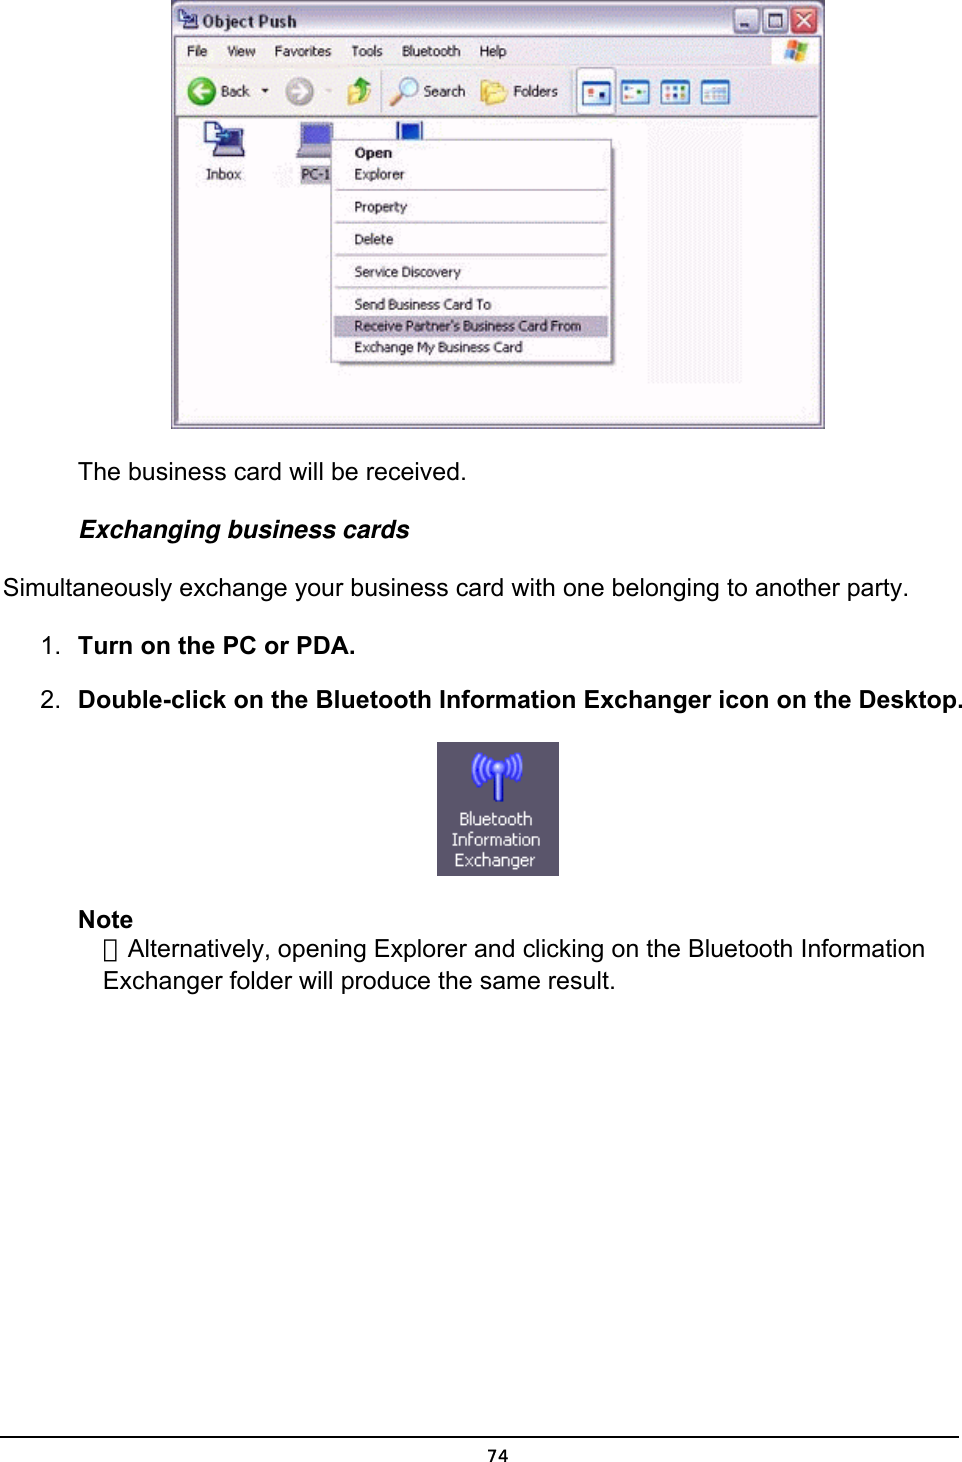   The business card will be received. Exchanging business cards Simultaneously exchange your business card with one belonging to another party. 1.  Turn on the PC or PDA. 2.  Double-click on the Bluetooth Information Exchanger icon on the Desktop.  Note ．Alternatively, opening Explorer and clicking on the Bluetooth Information Exchanger folder will produce the same result.  74